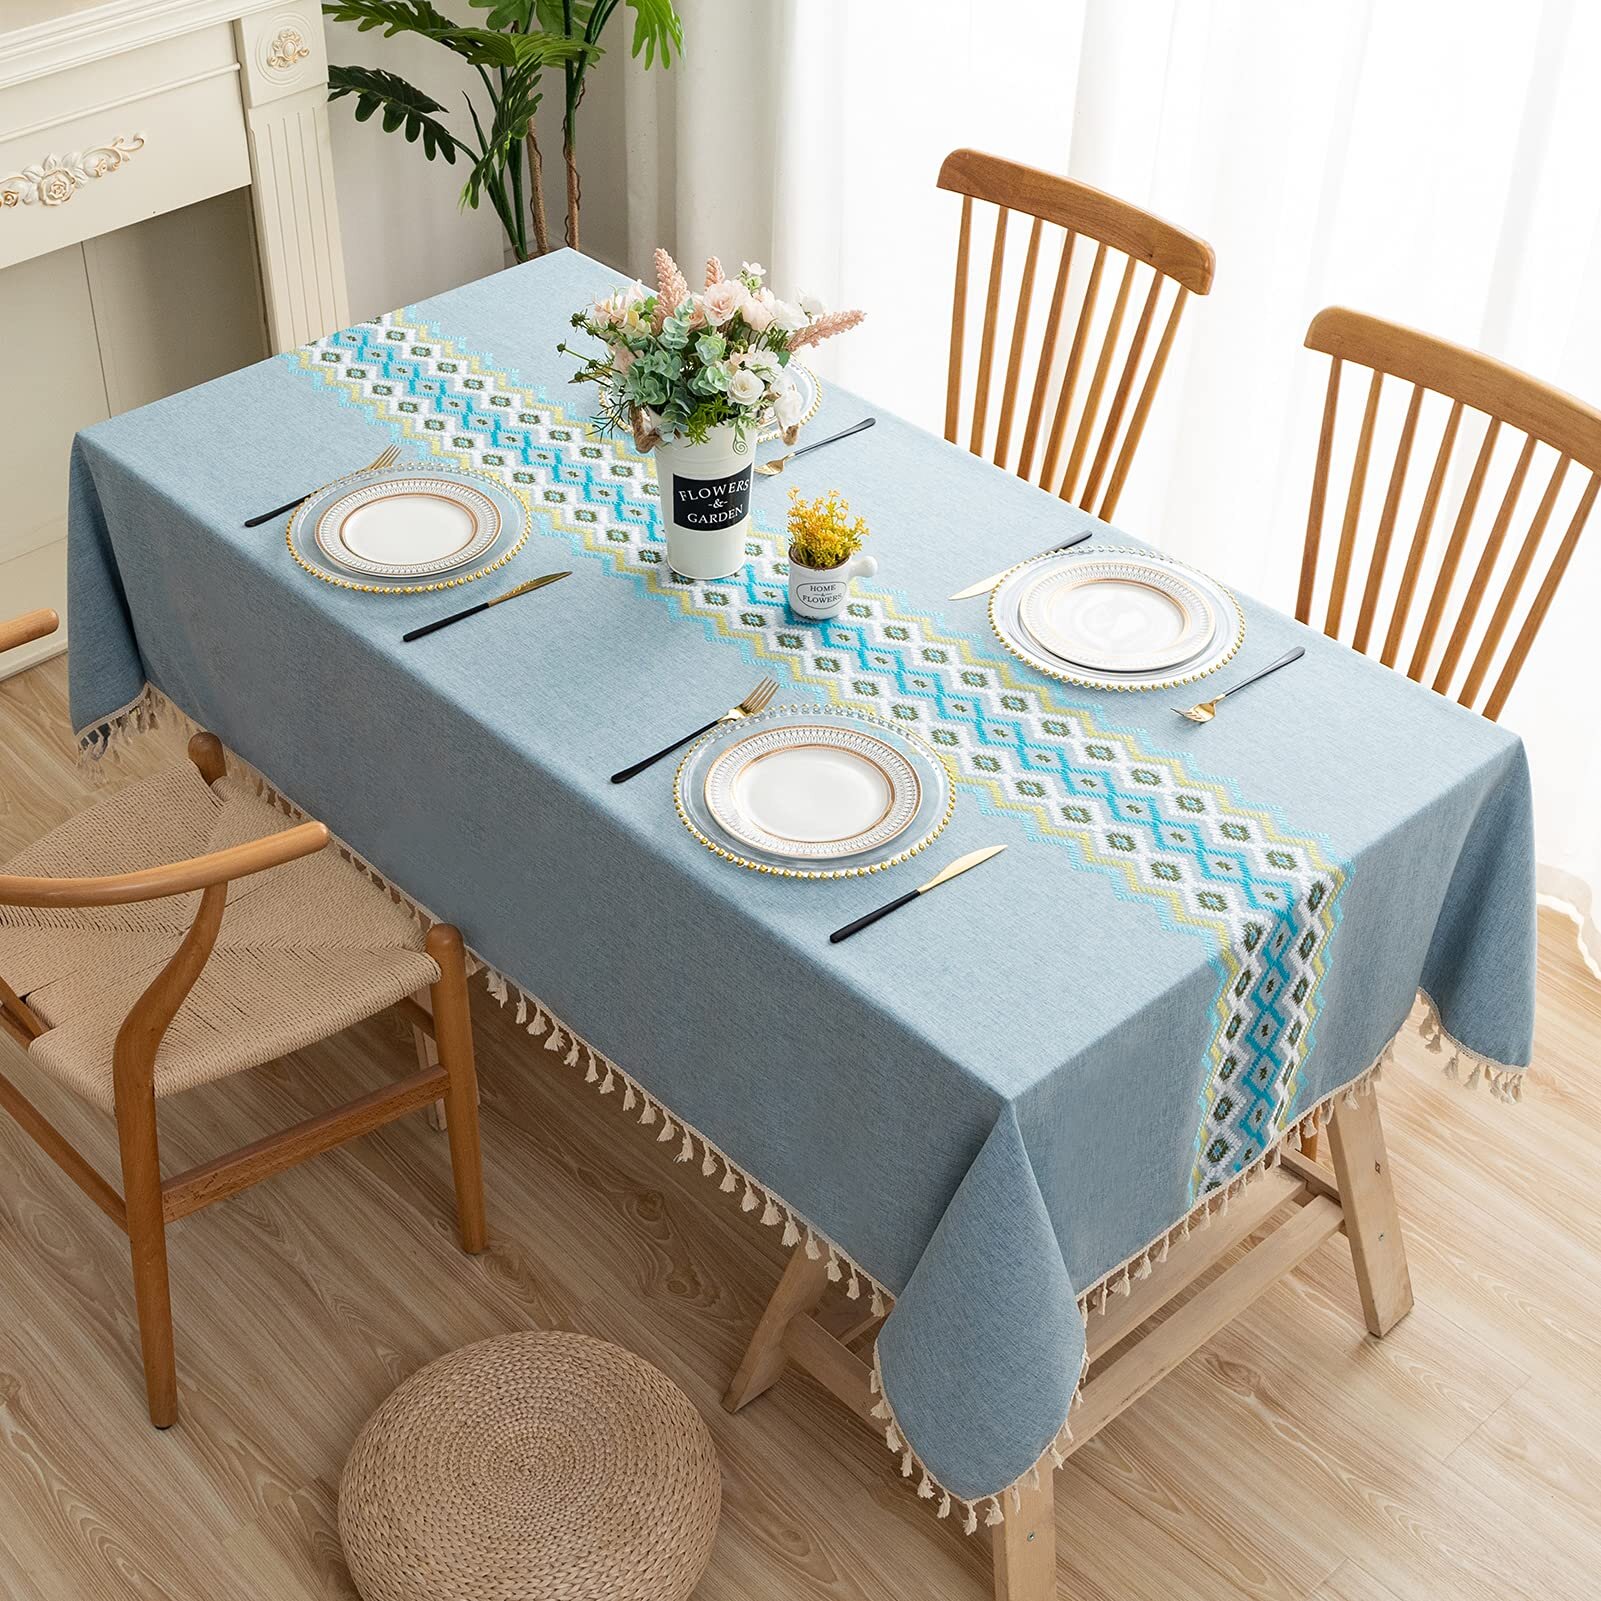 Waterproof Rectangle Tablecloth Embroidery-Linen Table Cloth Rustic Fabric 